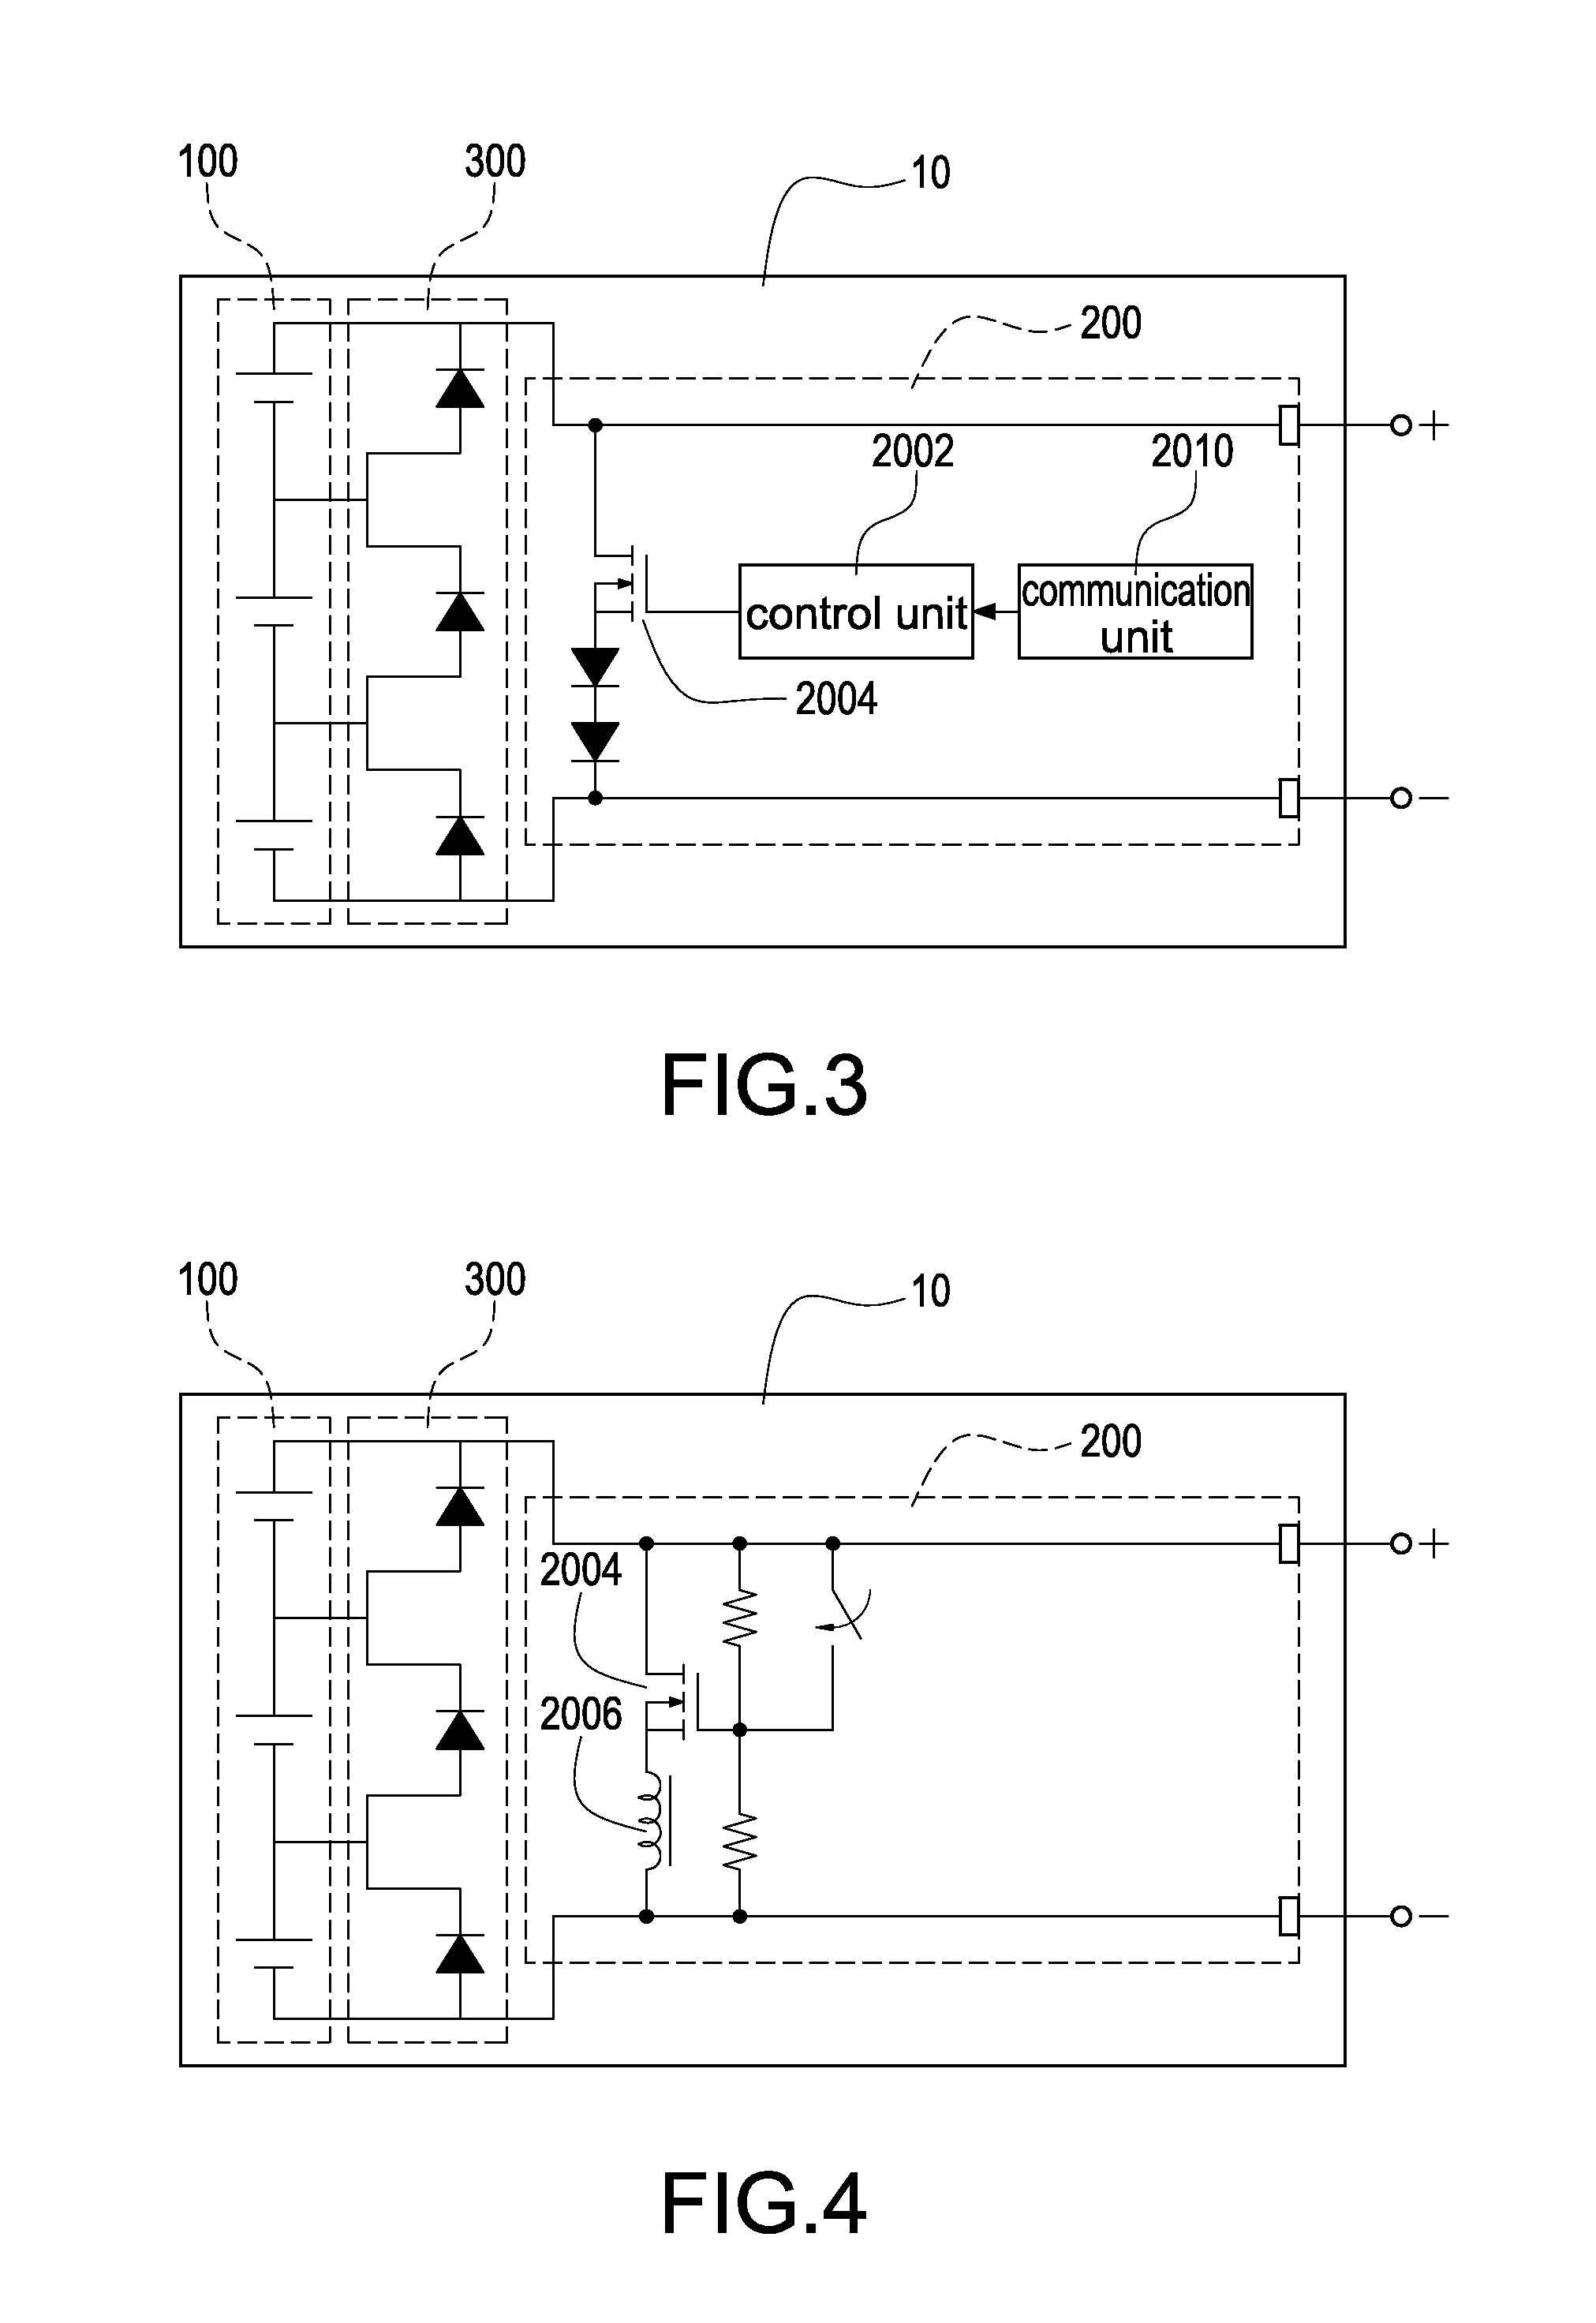 Photovoltaic power system with generation modules